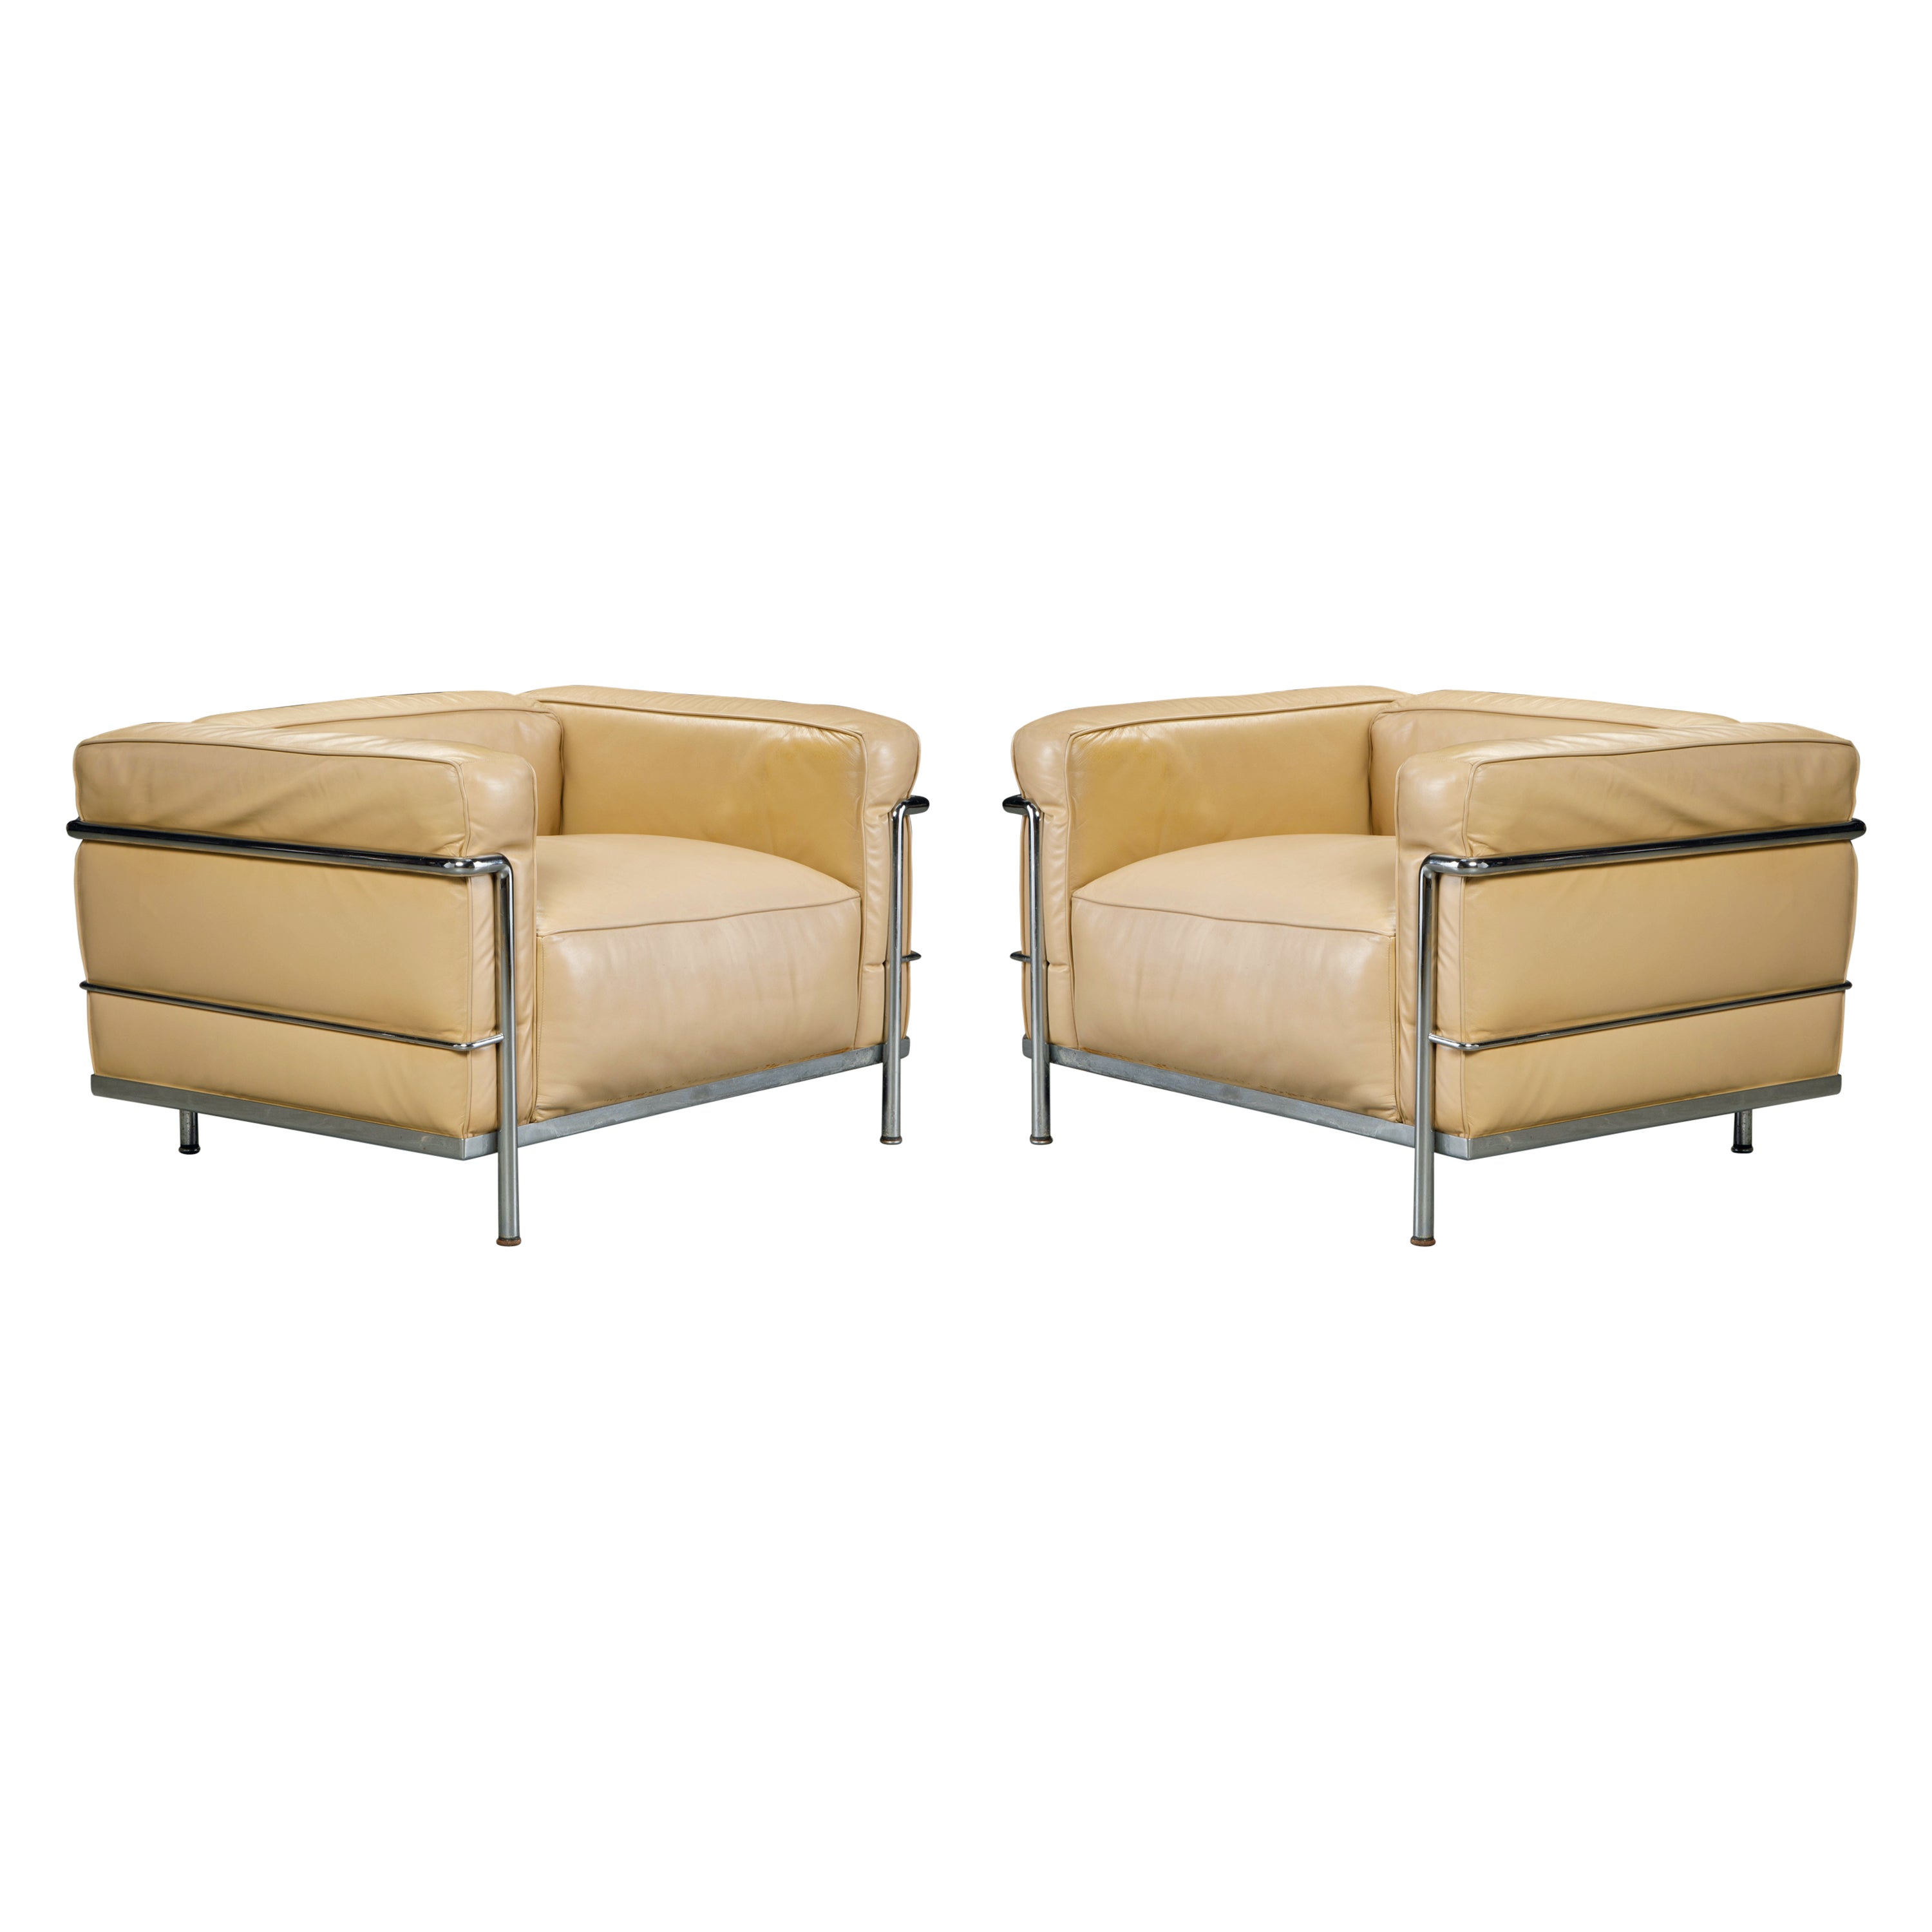 Pair of Early Production 'LC3' Lounge Chairs by Le Corbusier for Cassina, Signed